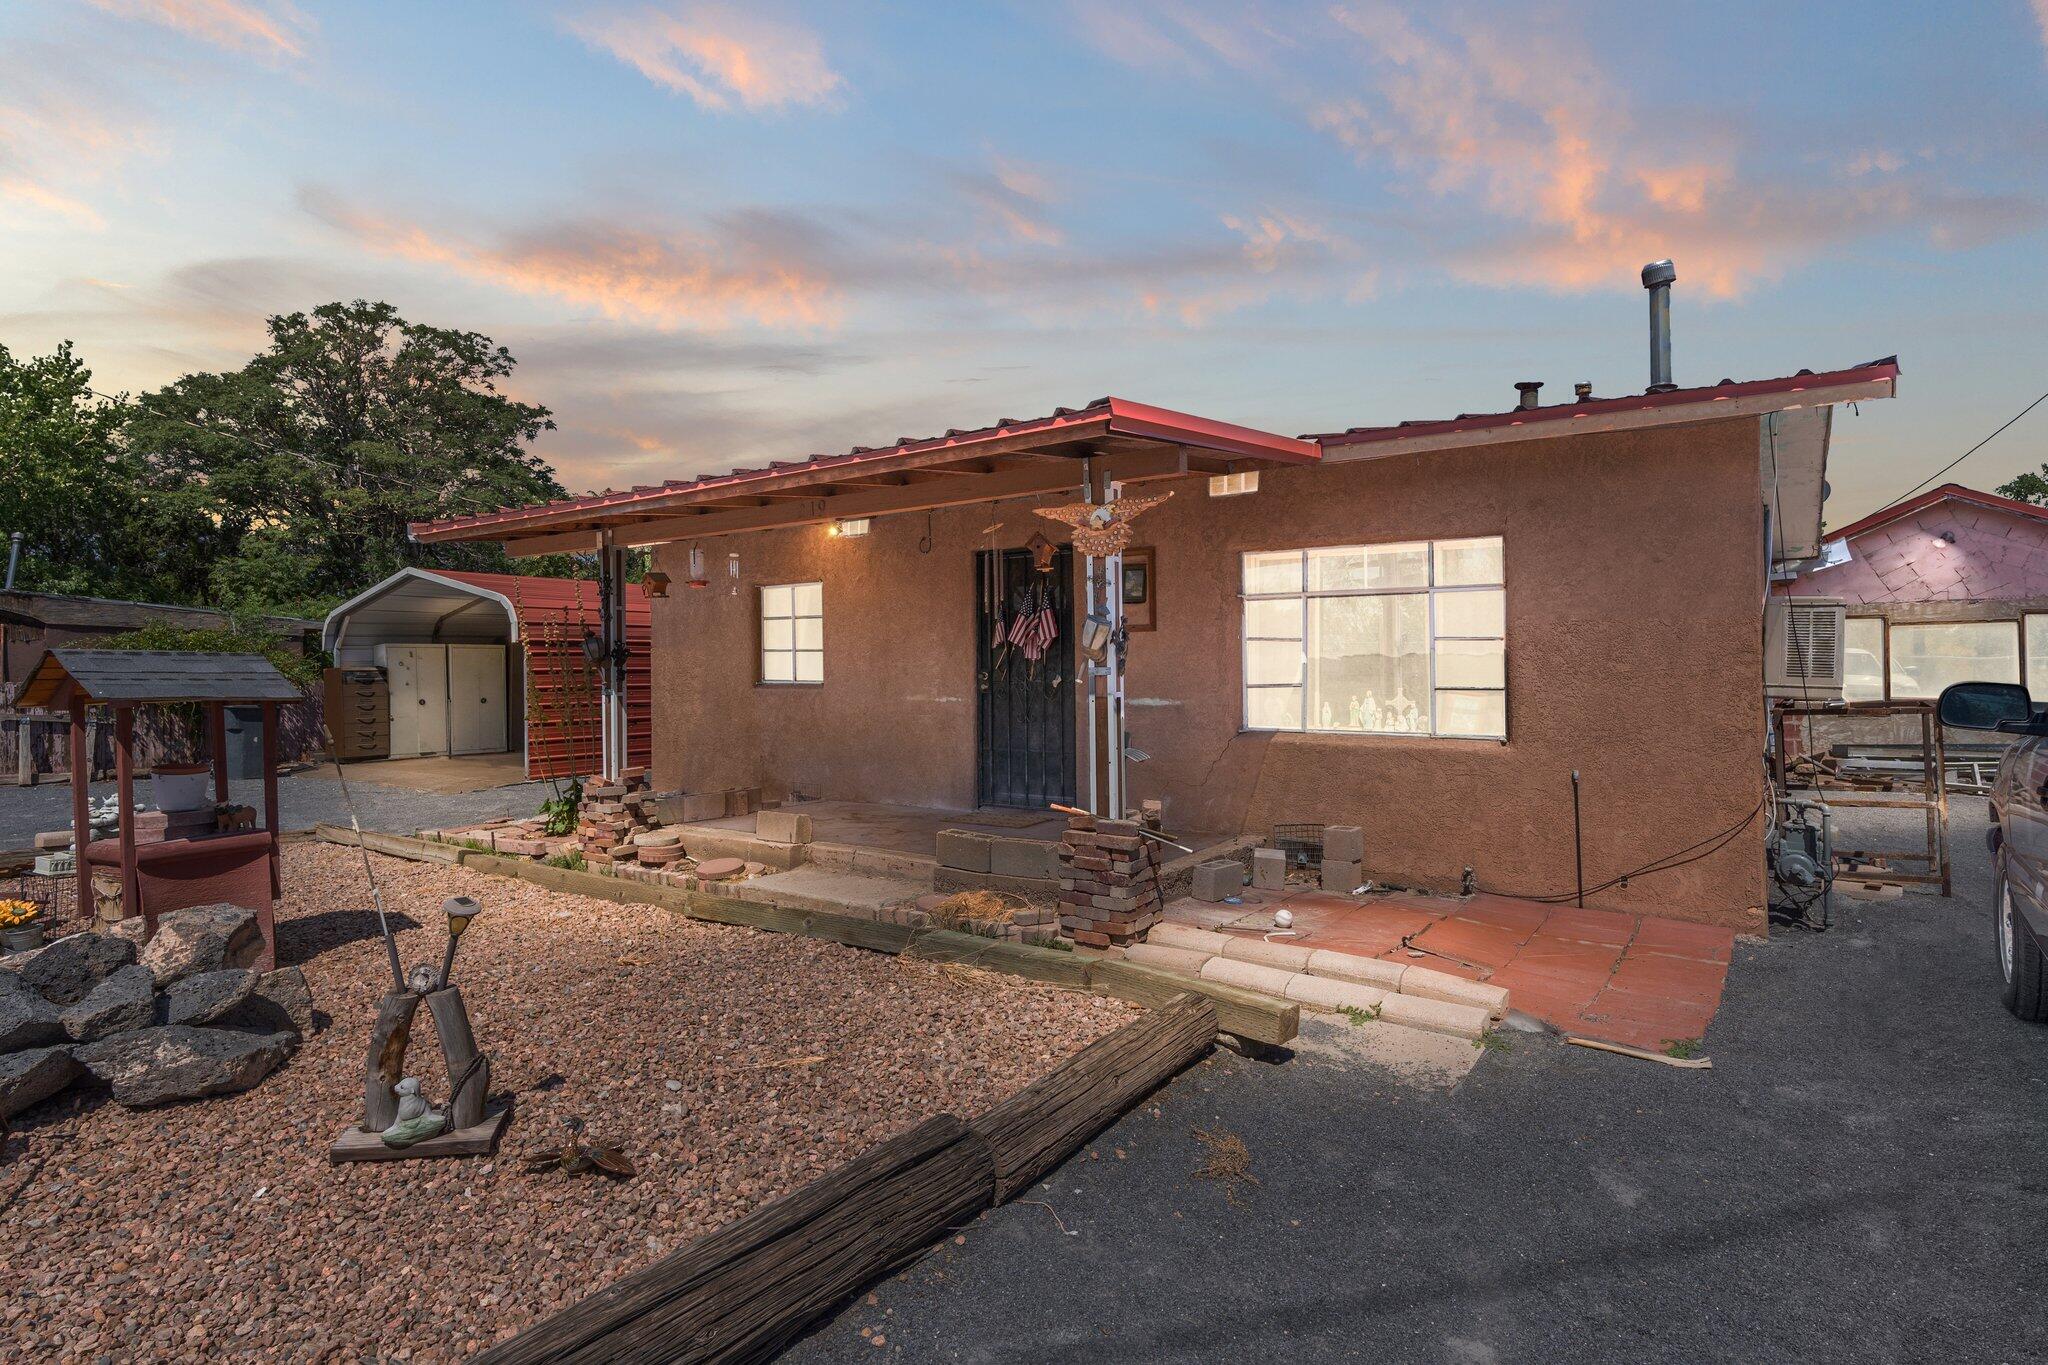 Great opportunity to purchase in the North Valley! Home features 1,487sf with 3 bedrooms, a full bath and 2 living areas! With a little TLC this home could be the perfect one!